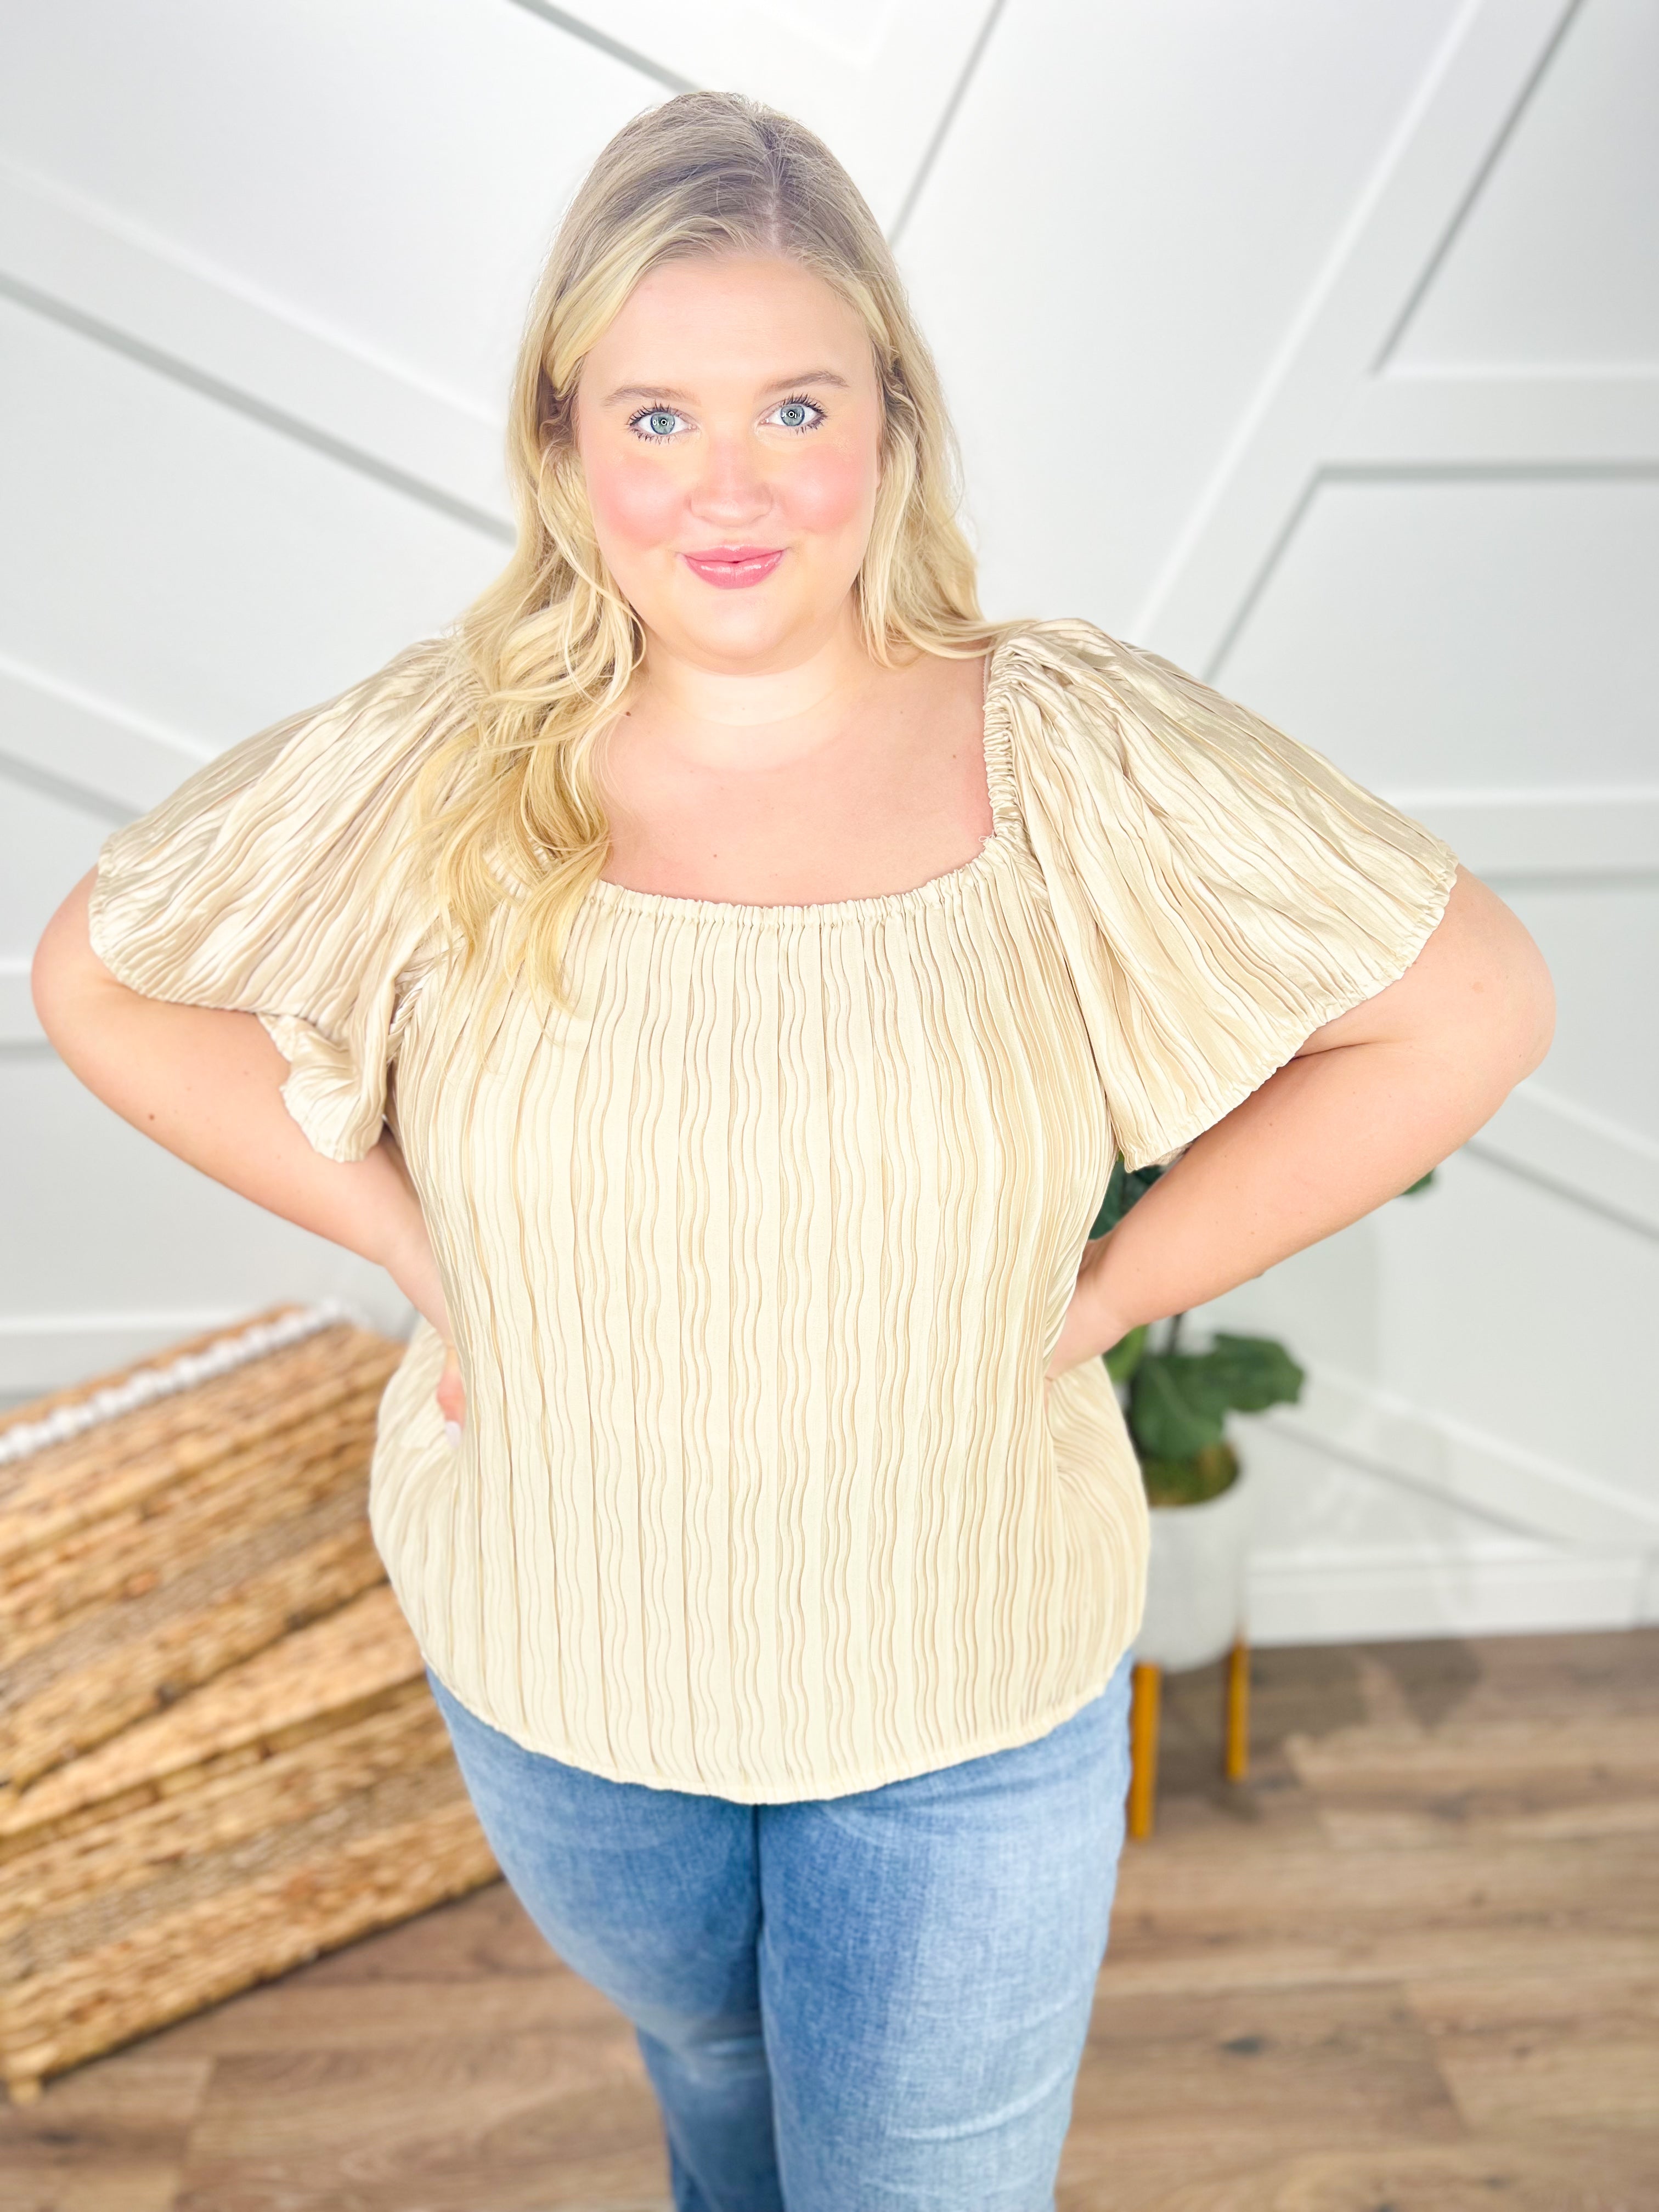 RESTOCK: Lustrous Elegance Top-110 Short Sleeve Top-Southern Grace-Heathered Boho Boutique, Women's Fashion and Accessories in Palmetto, FL